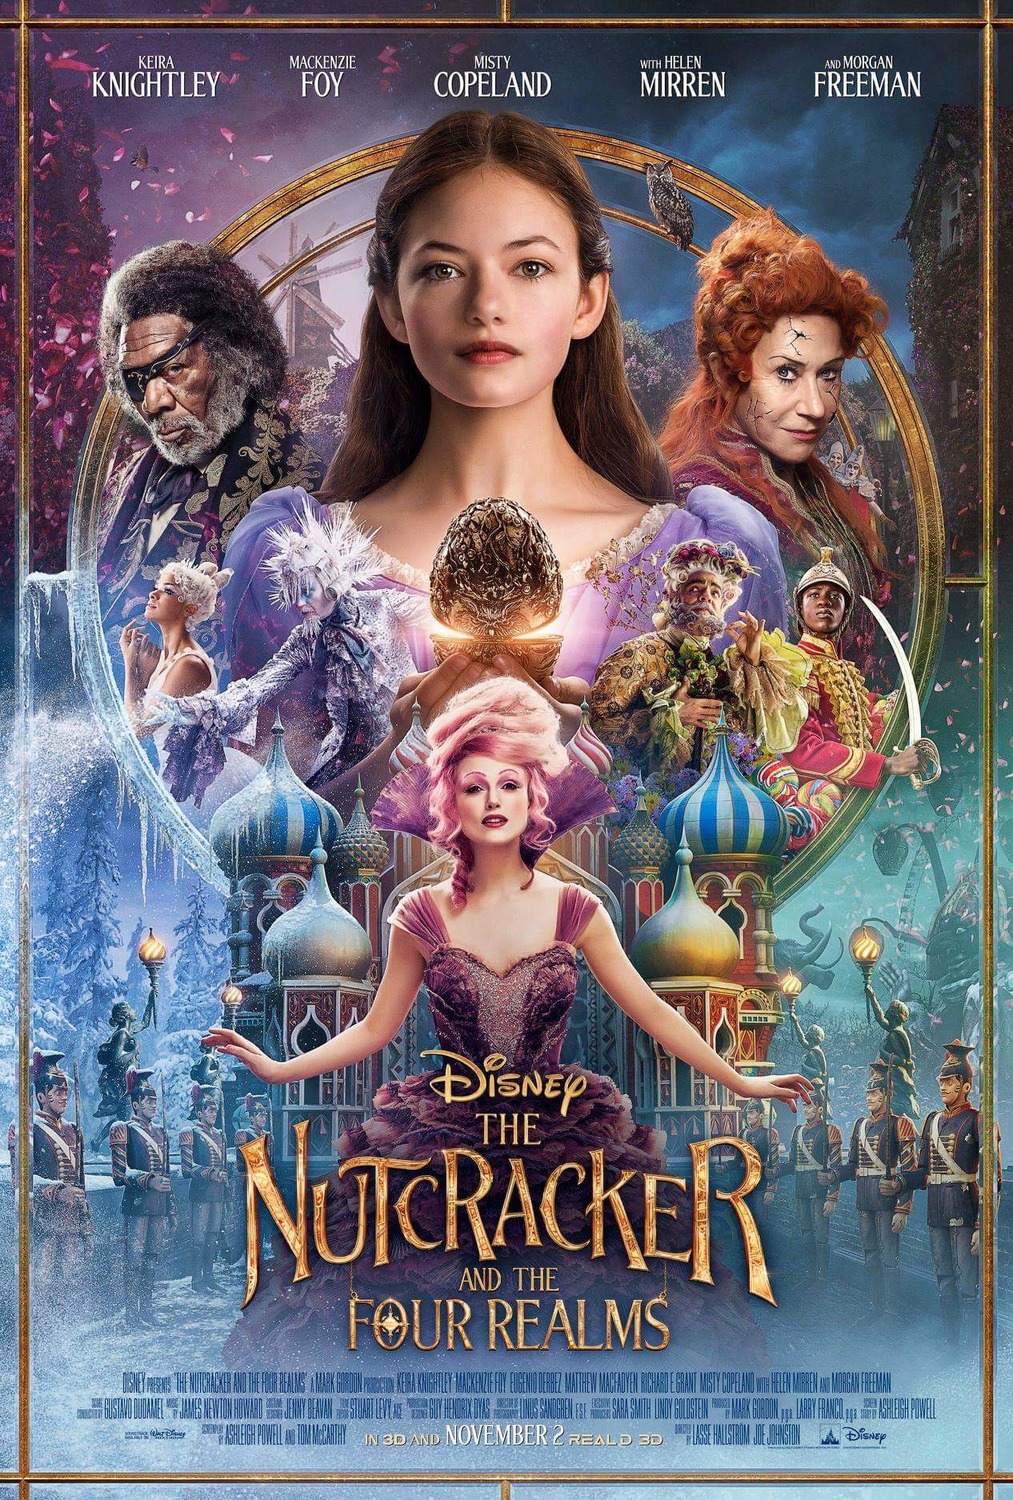 "The Nutcracker and the Four Realms" movie poster